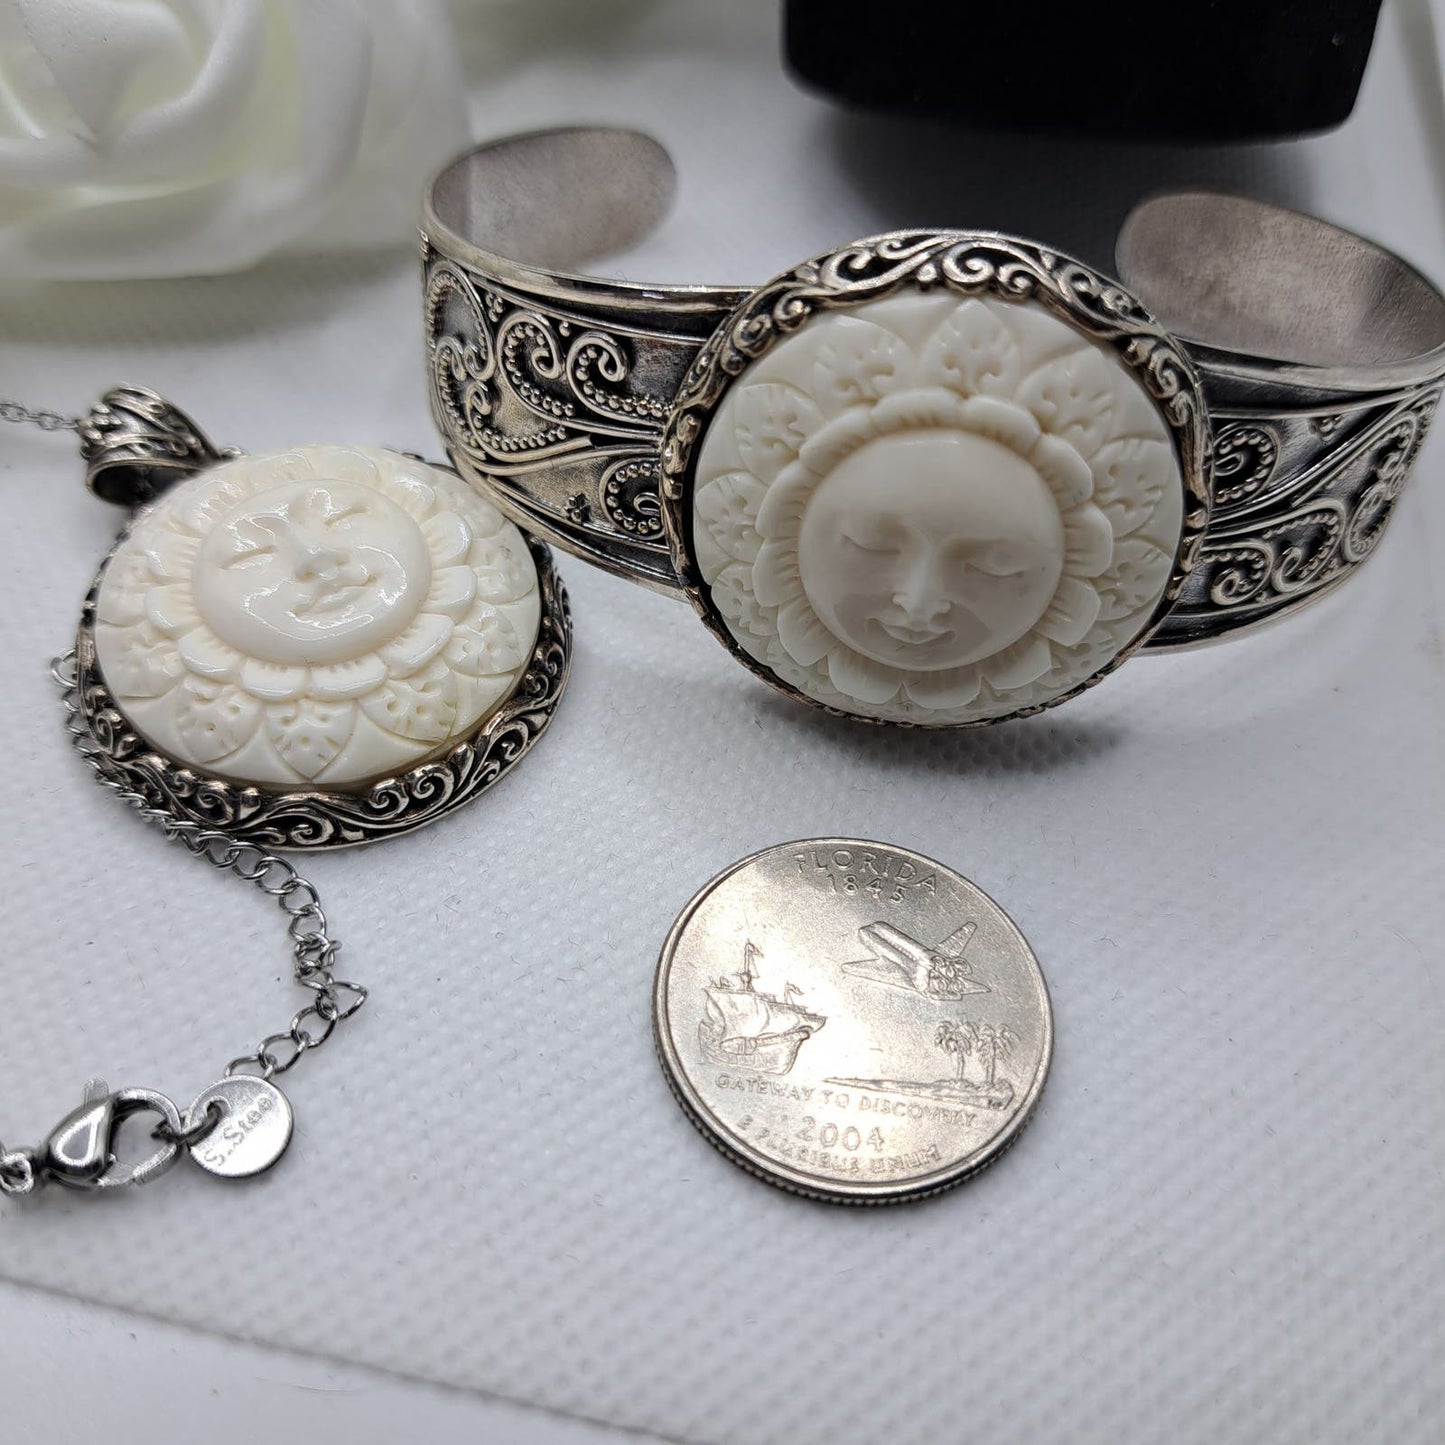 Bali Goddess Carved Cuff Bracelet and Pendant Sterling Silver with Jewelry box